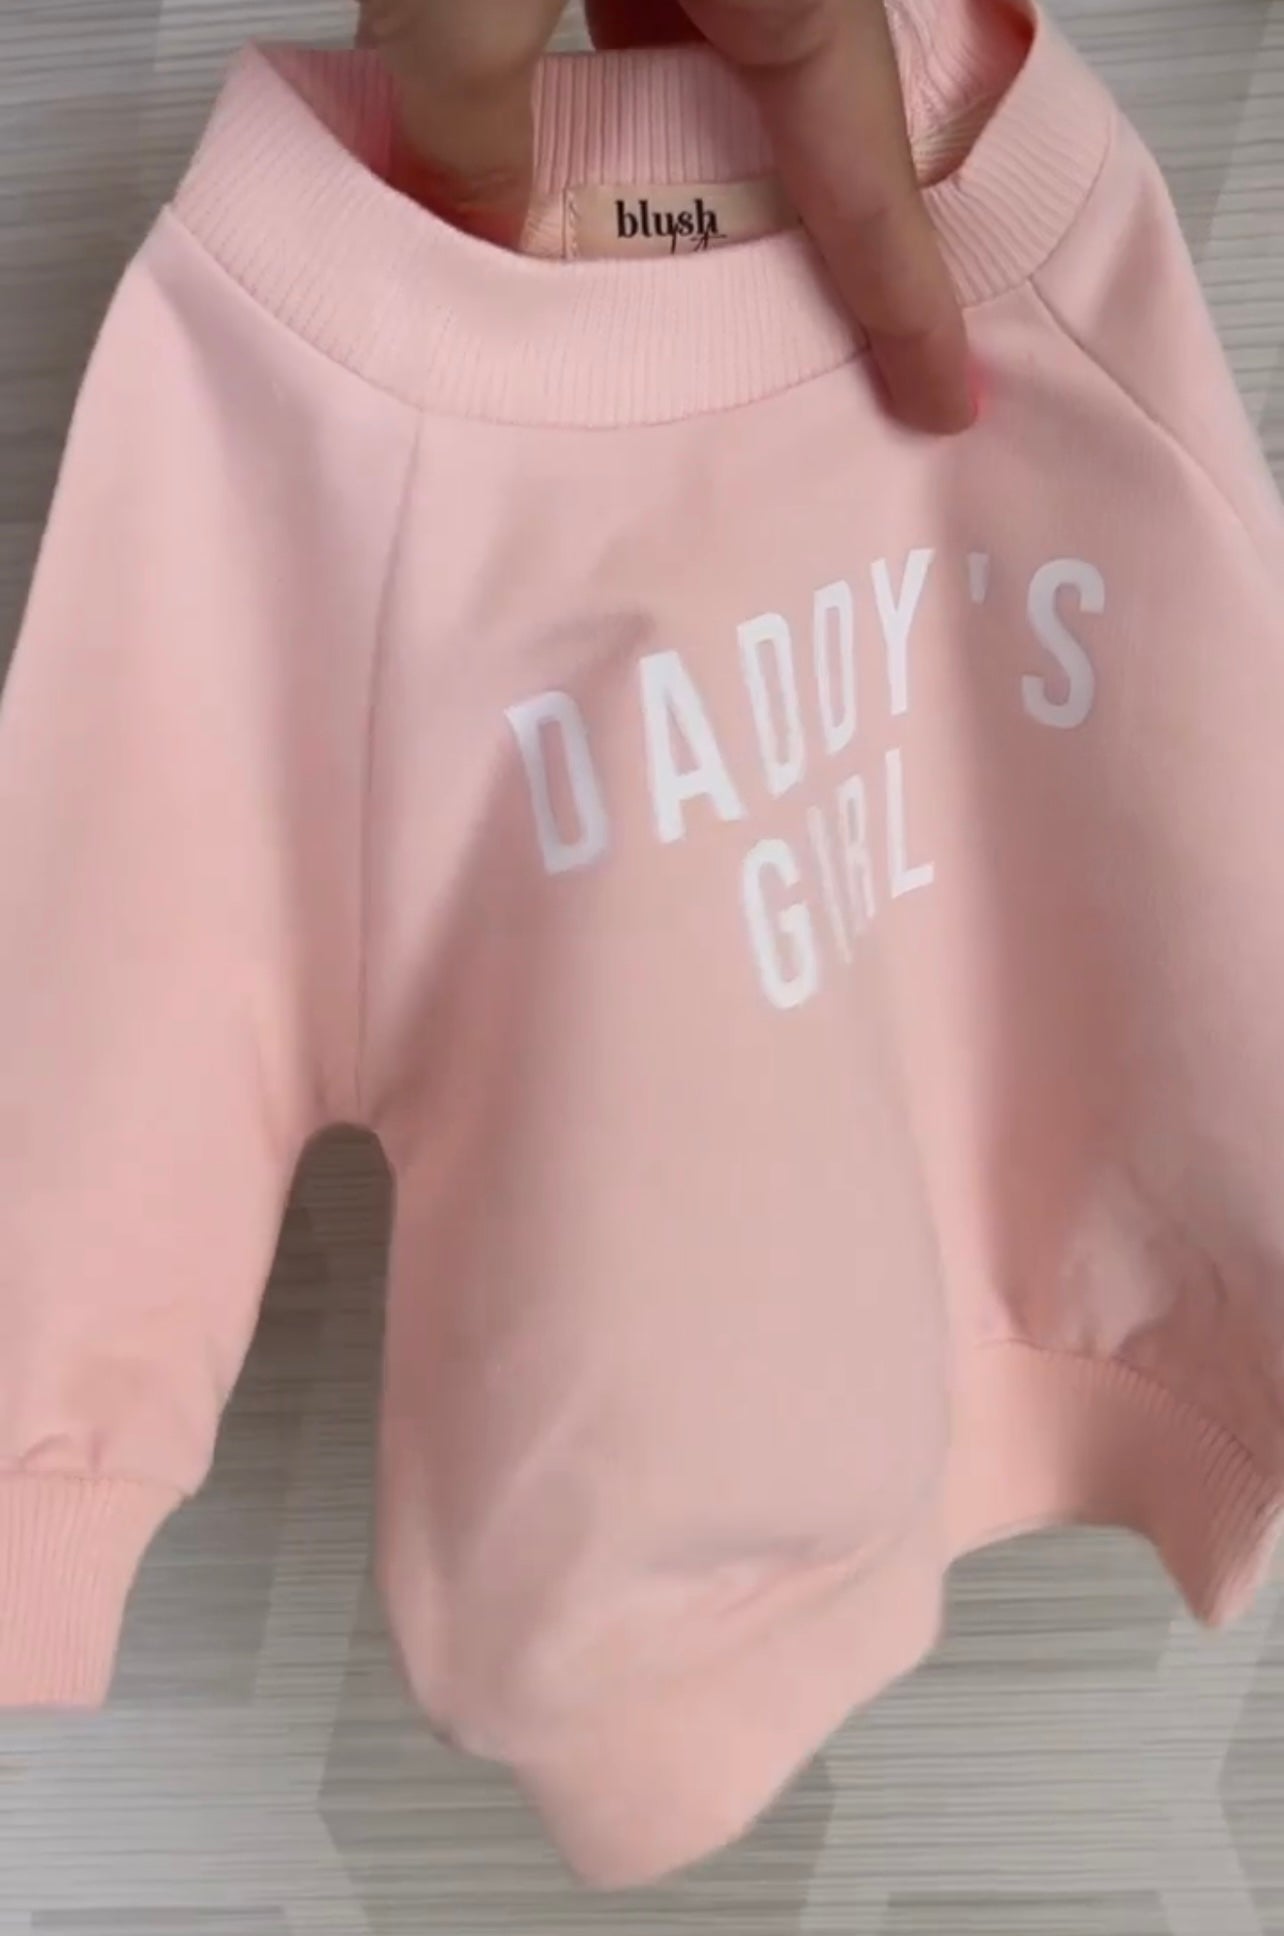 Daddy’s Girl Sweater